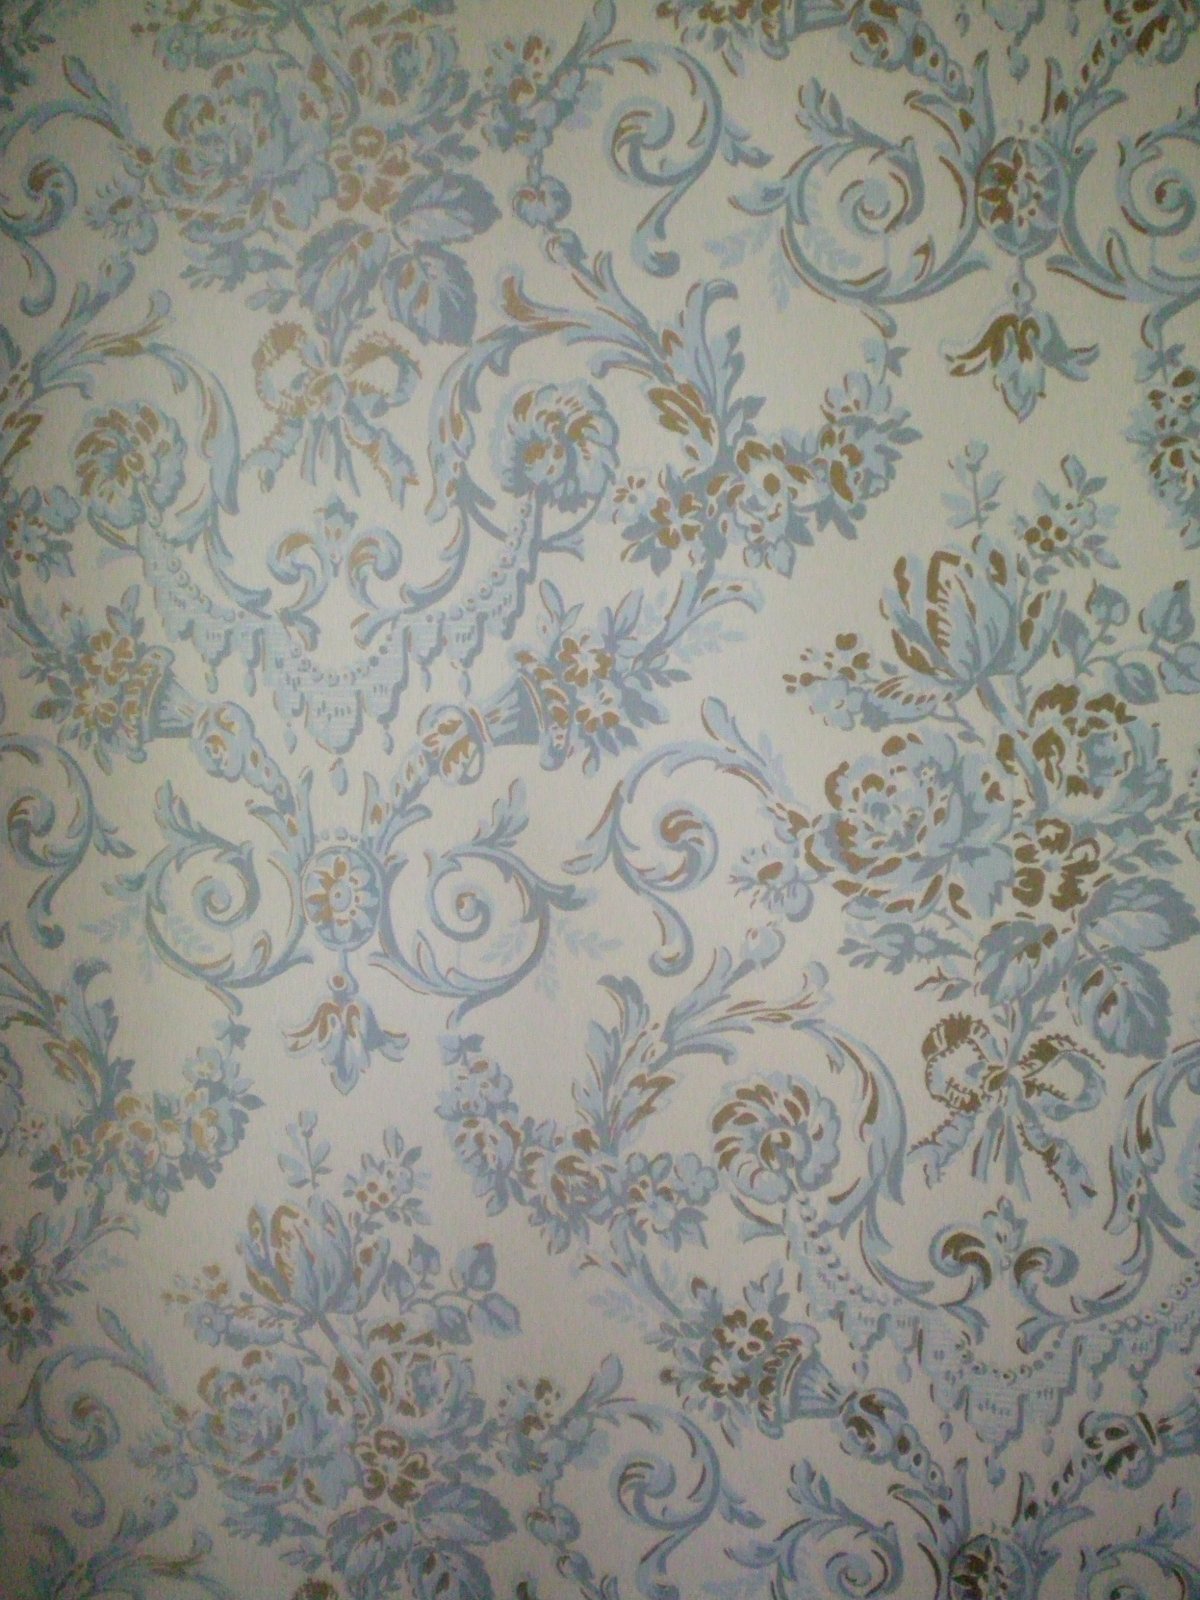 The Wallpaper Background Victorian